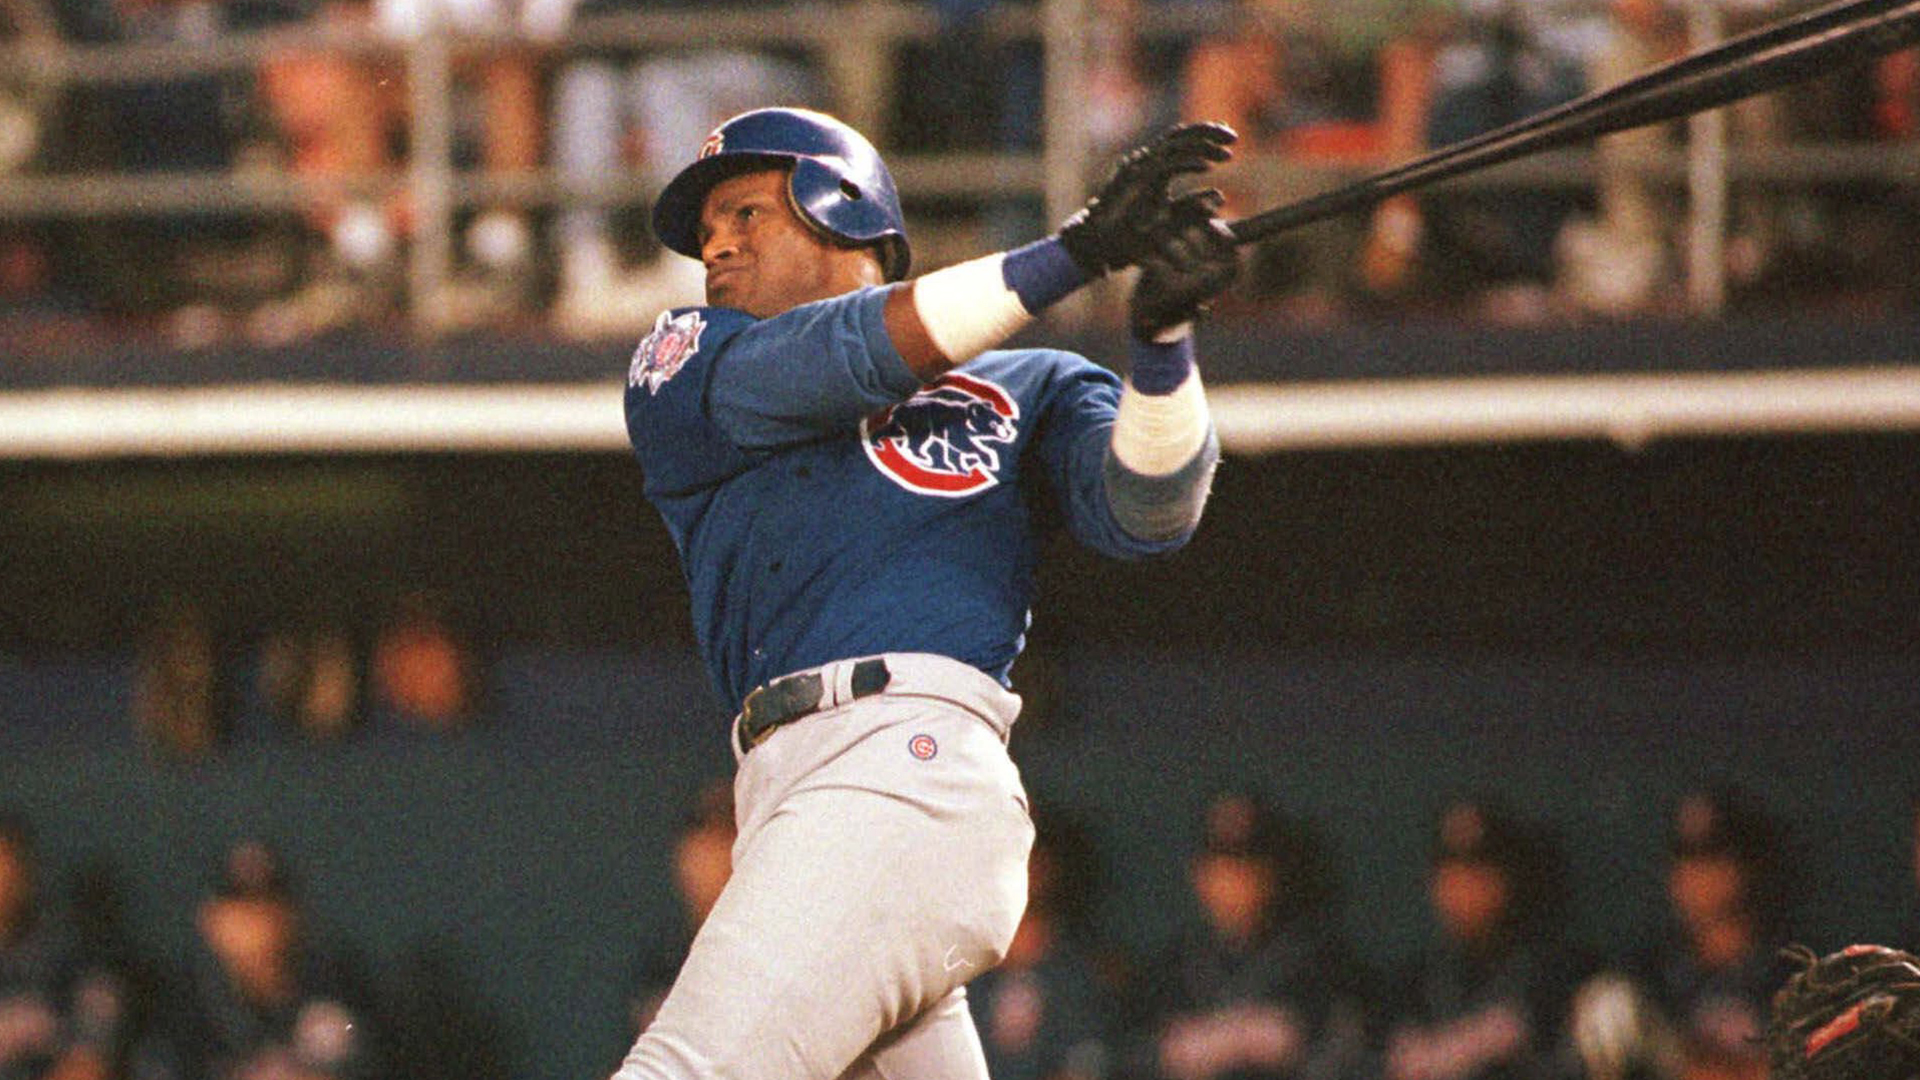 Cepeda 2008-2020 column archive: So what if Sammy Sosa takes a walk on the  white side?